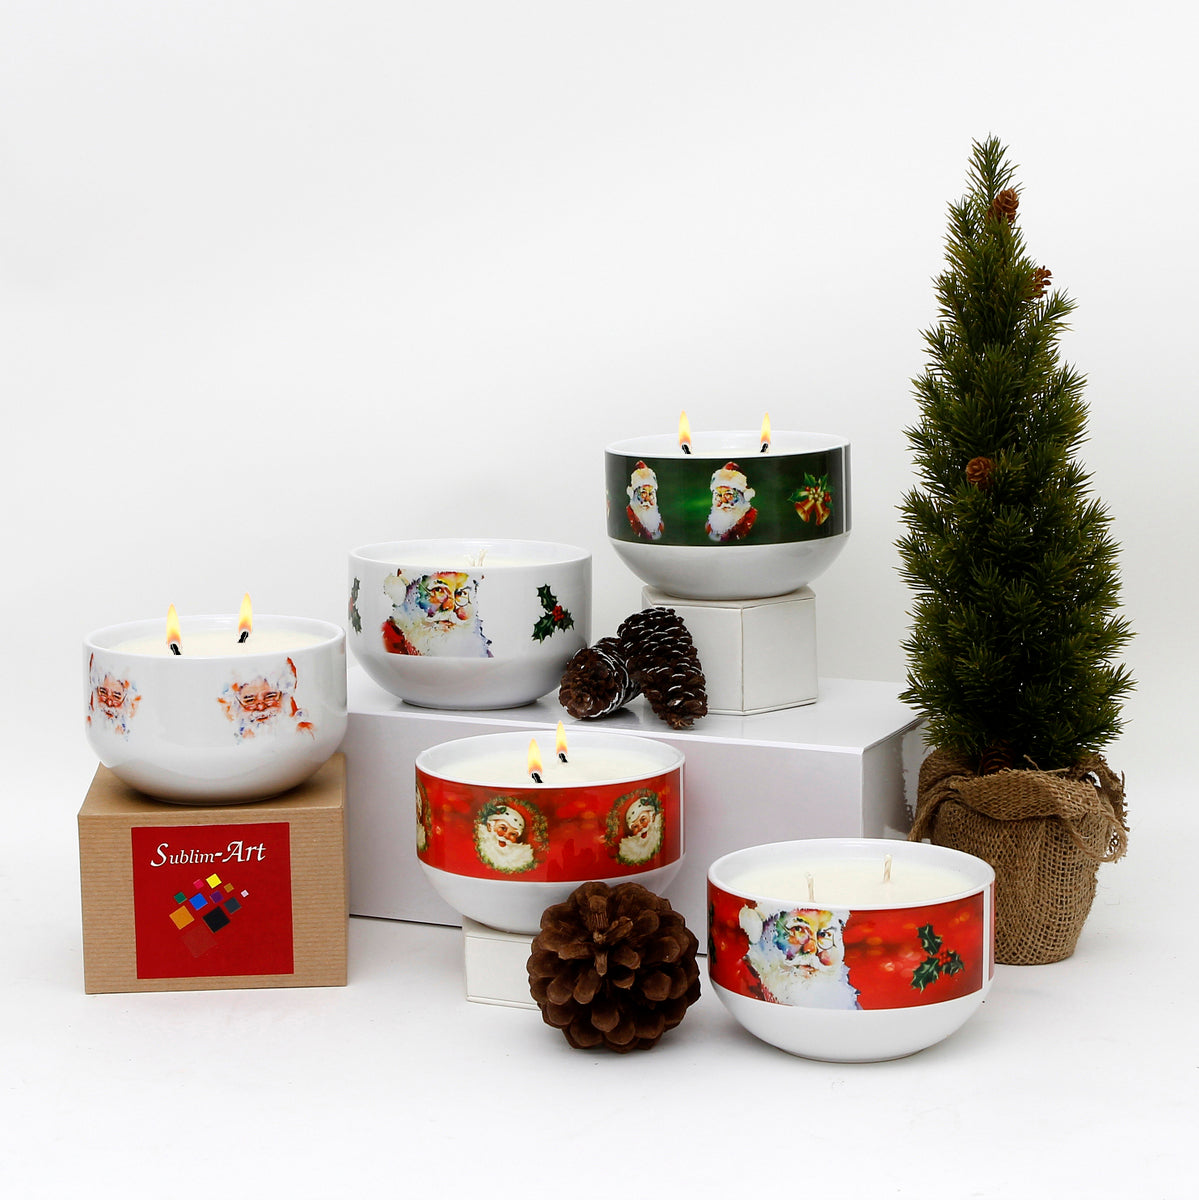 SUBLIMART: Two Wicks Soy Wax Candle in a Porcelain Bowl - Santa Claus (Design #XMS05)